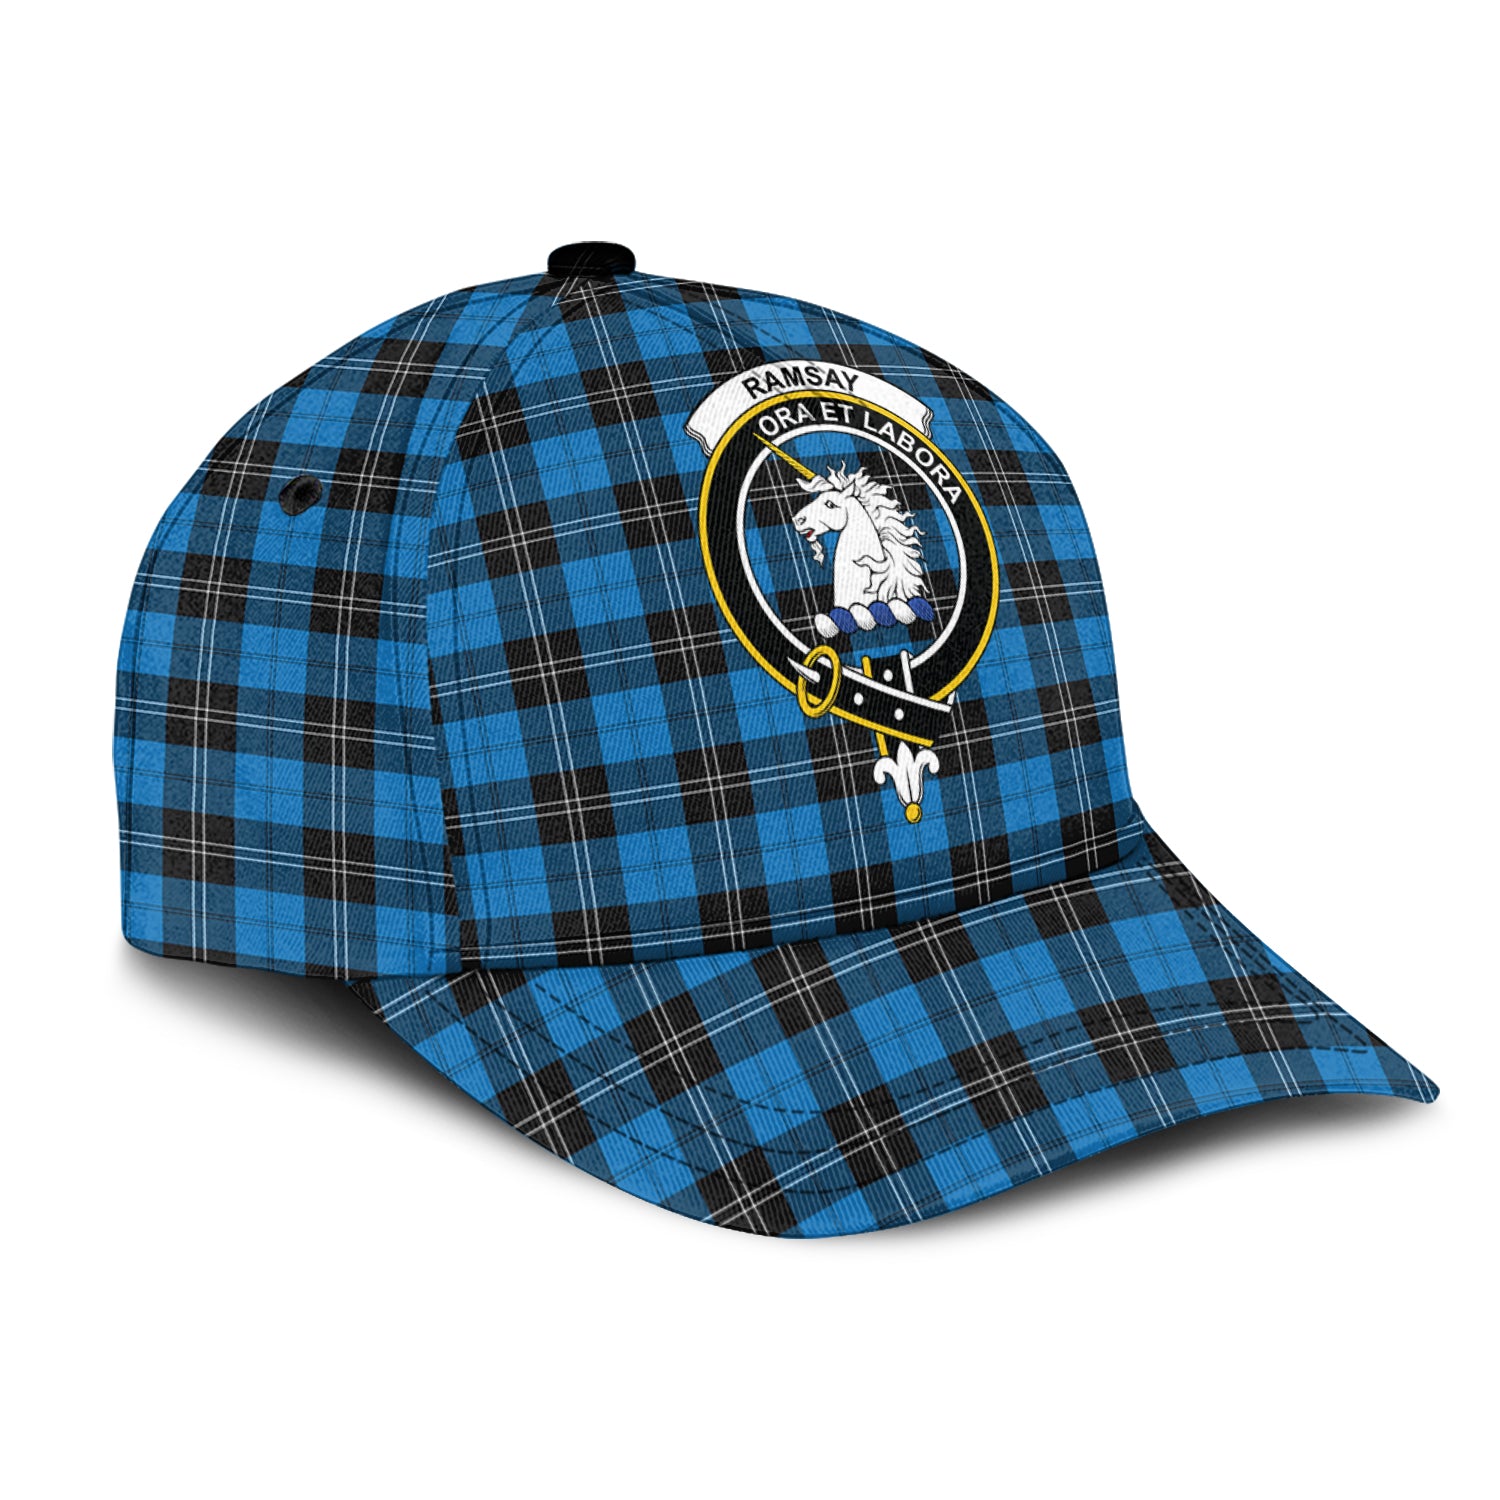 ramsay-blue-ancient-tartan-classic-cap-with-family-crest